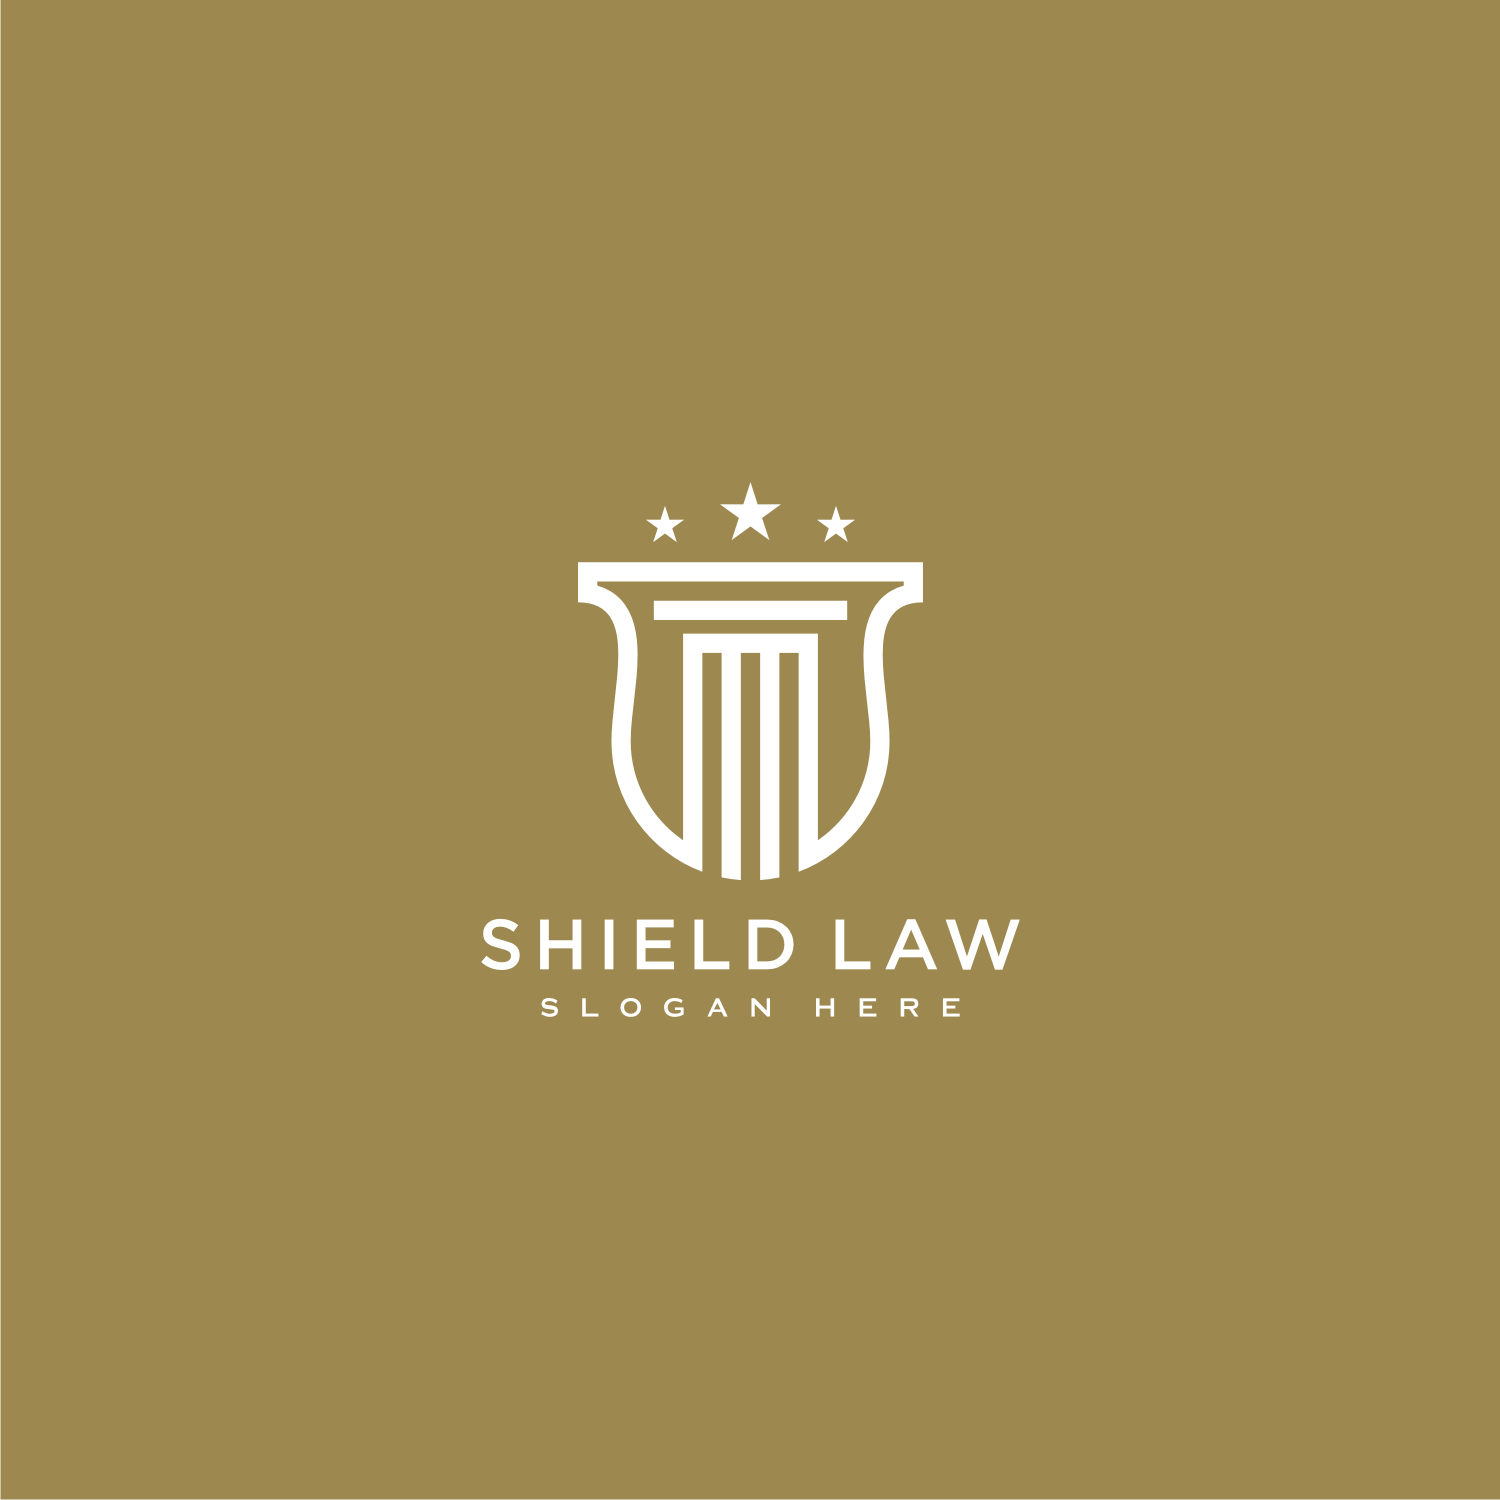 Law Firm and Shield Logo Design Vector previews.